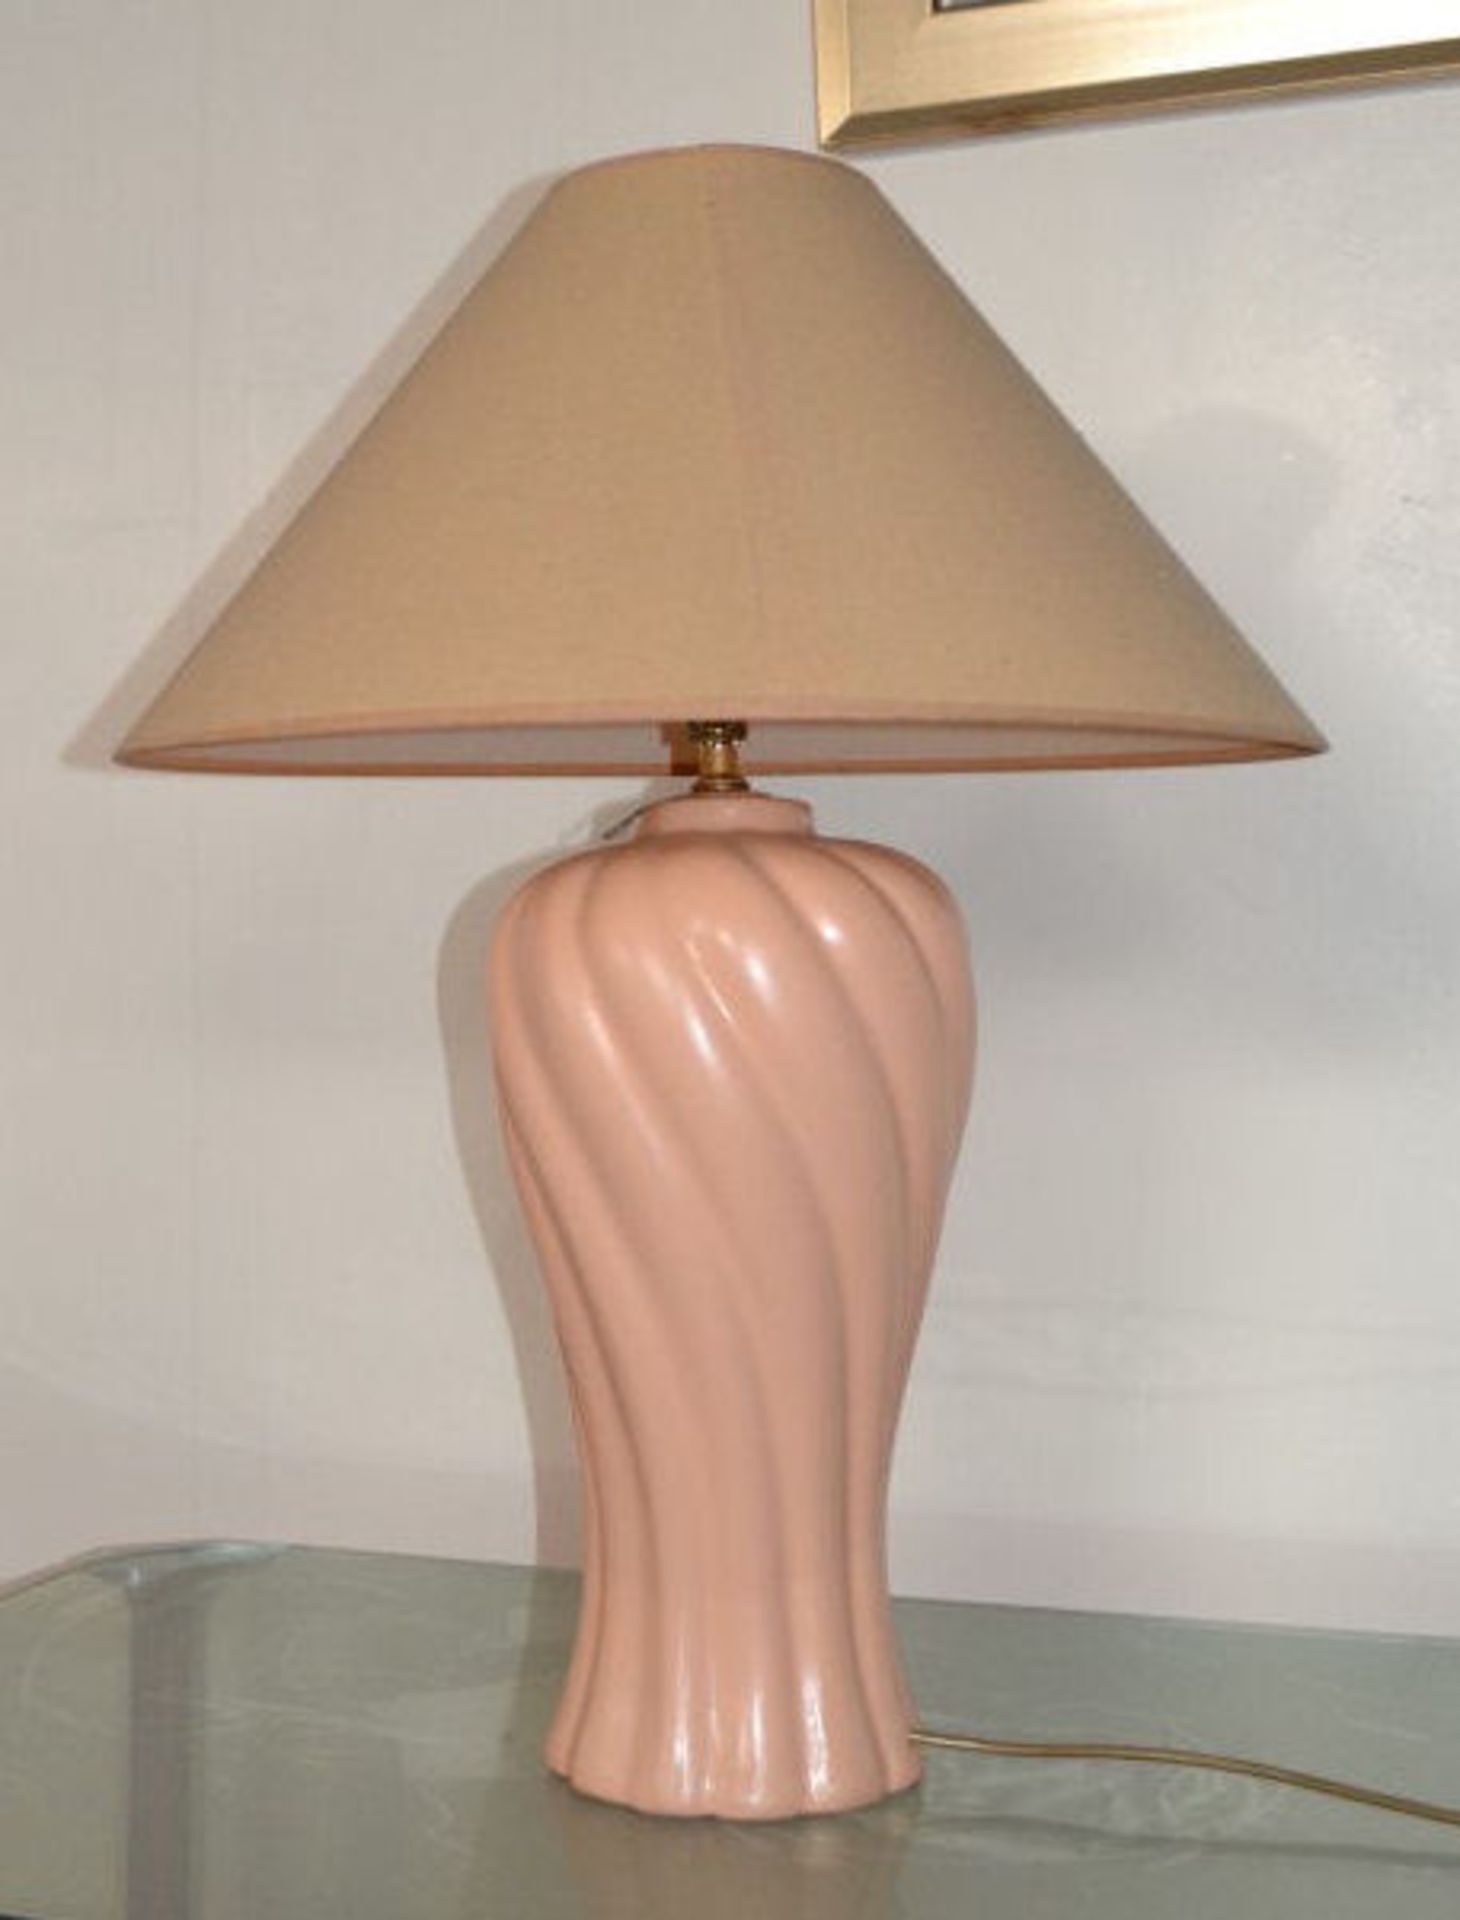 1 x Large Peach Lamp. Total Height Of 74cm - CL108 - Image 2 of 4